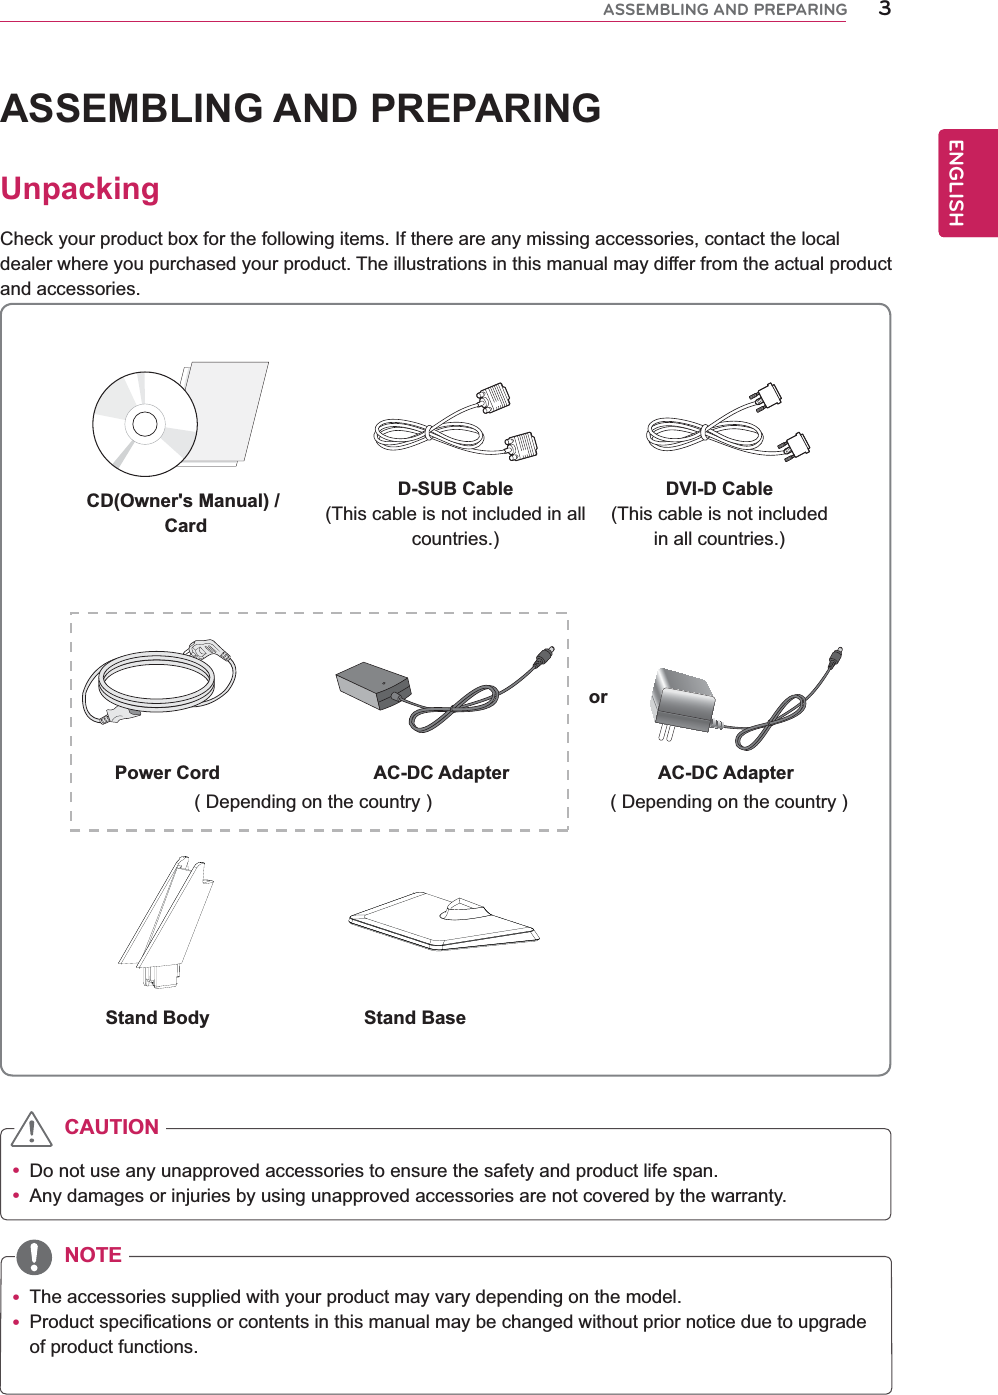 3ENGENGLISHASSEMBLING AND PREPARINGASSEMBLING AND PREPARINGUnpackingCheck your product box for the following items. If there are any missing accessories, contact the local dealer where you purchased your product. The illustrations in this manual may differ from the actual product and accessories. Do not use any unapproved accessories to ensure the safety and product life span. Any damages or injuries by using unapproved accessories are not covered by the warranty.  The accessories supplied with your product may vary depending on the model. Product specifications or contents in this manual may be changed without prior notice due to upgrade of product functions.CAUTIONNOTEStand Body Stand BaseCD(Owner&apos;s Manual) / CardD-SUB Cable(This cable is not included in all countries.)DVI-D Cable(This cable is not included in all countries.)( Depending on the country ) ( Depending on the country )Power Cord AC-DC Adapter AC-DC Adapteror 